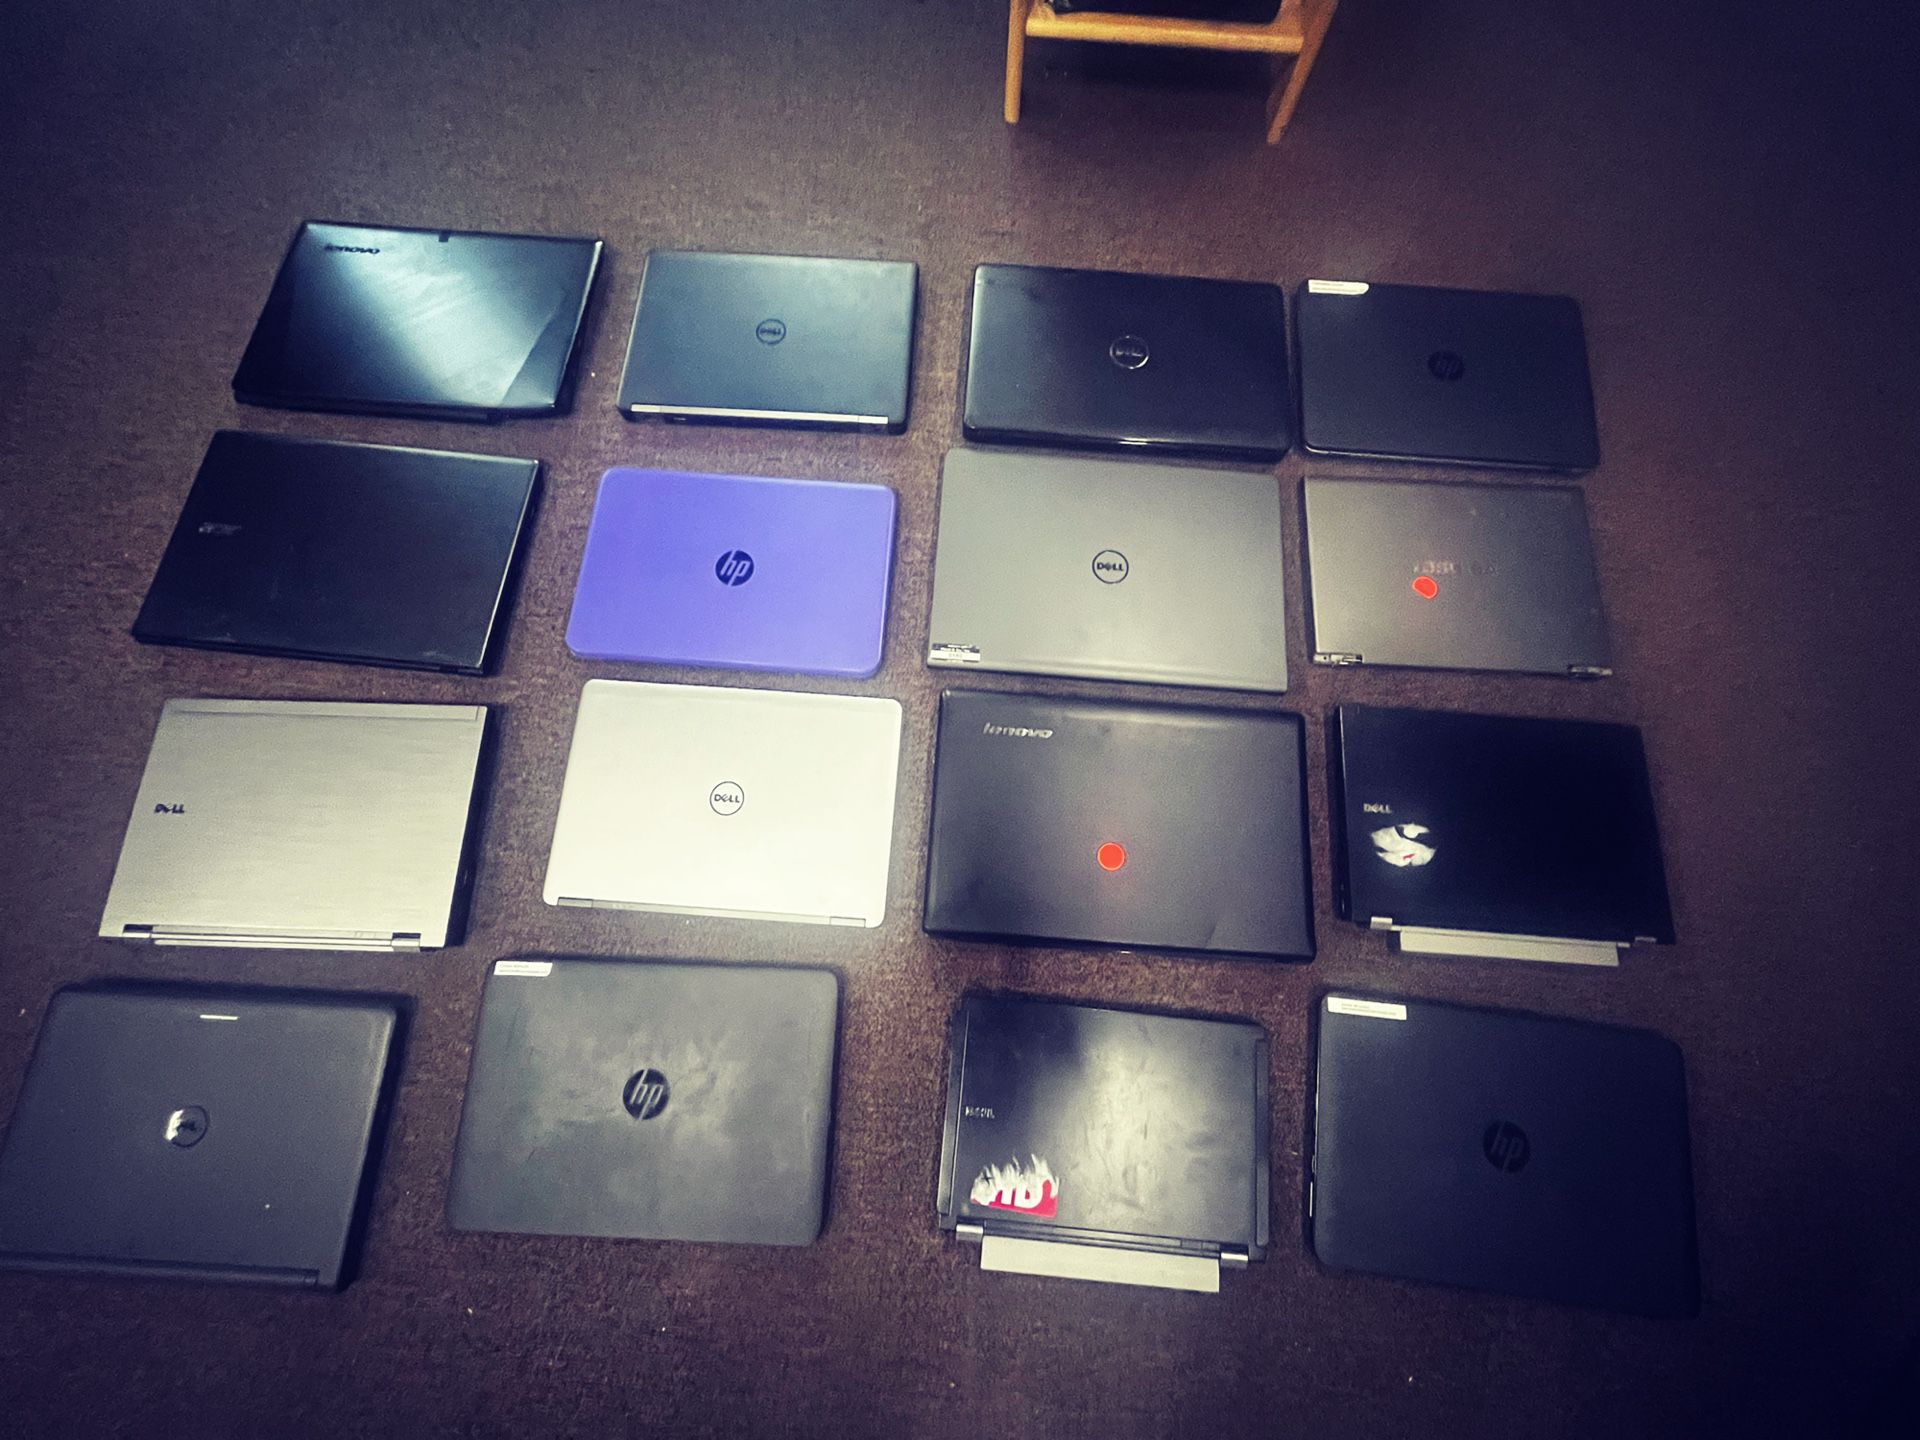 Wholesale 16 Laptops 26 Dollar A Piece No Charger  No Hard  Drive Some Are Missing Baterries And Ram   